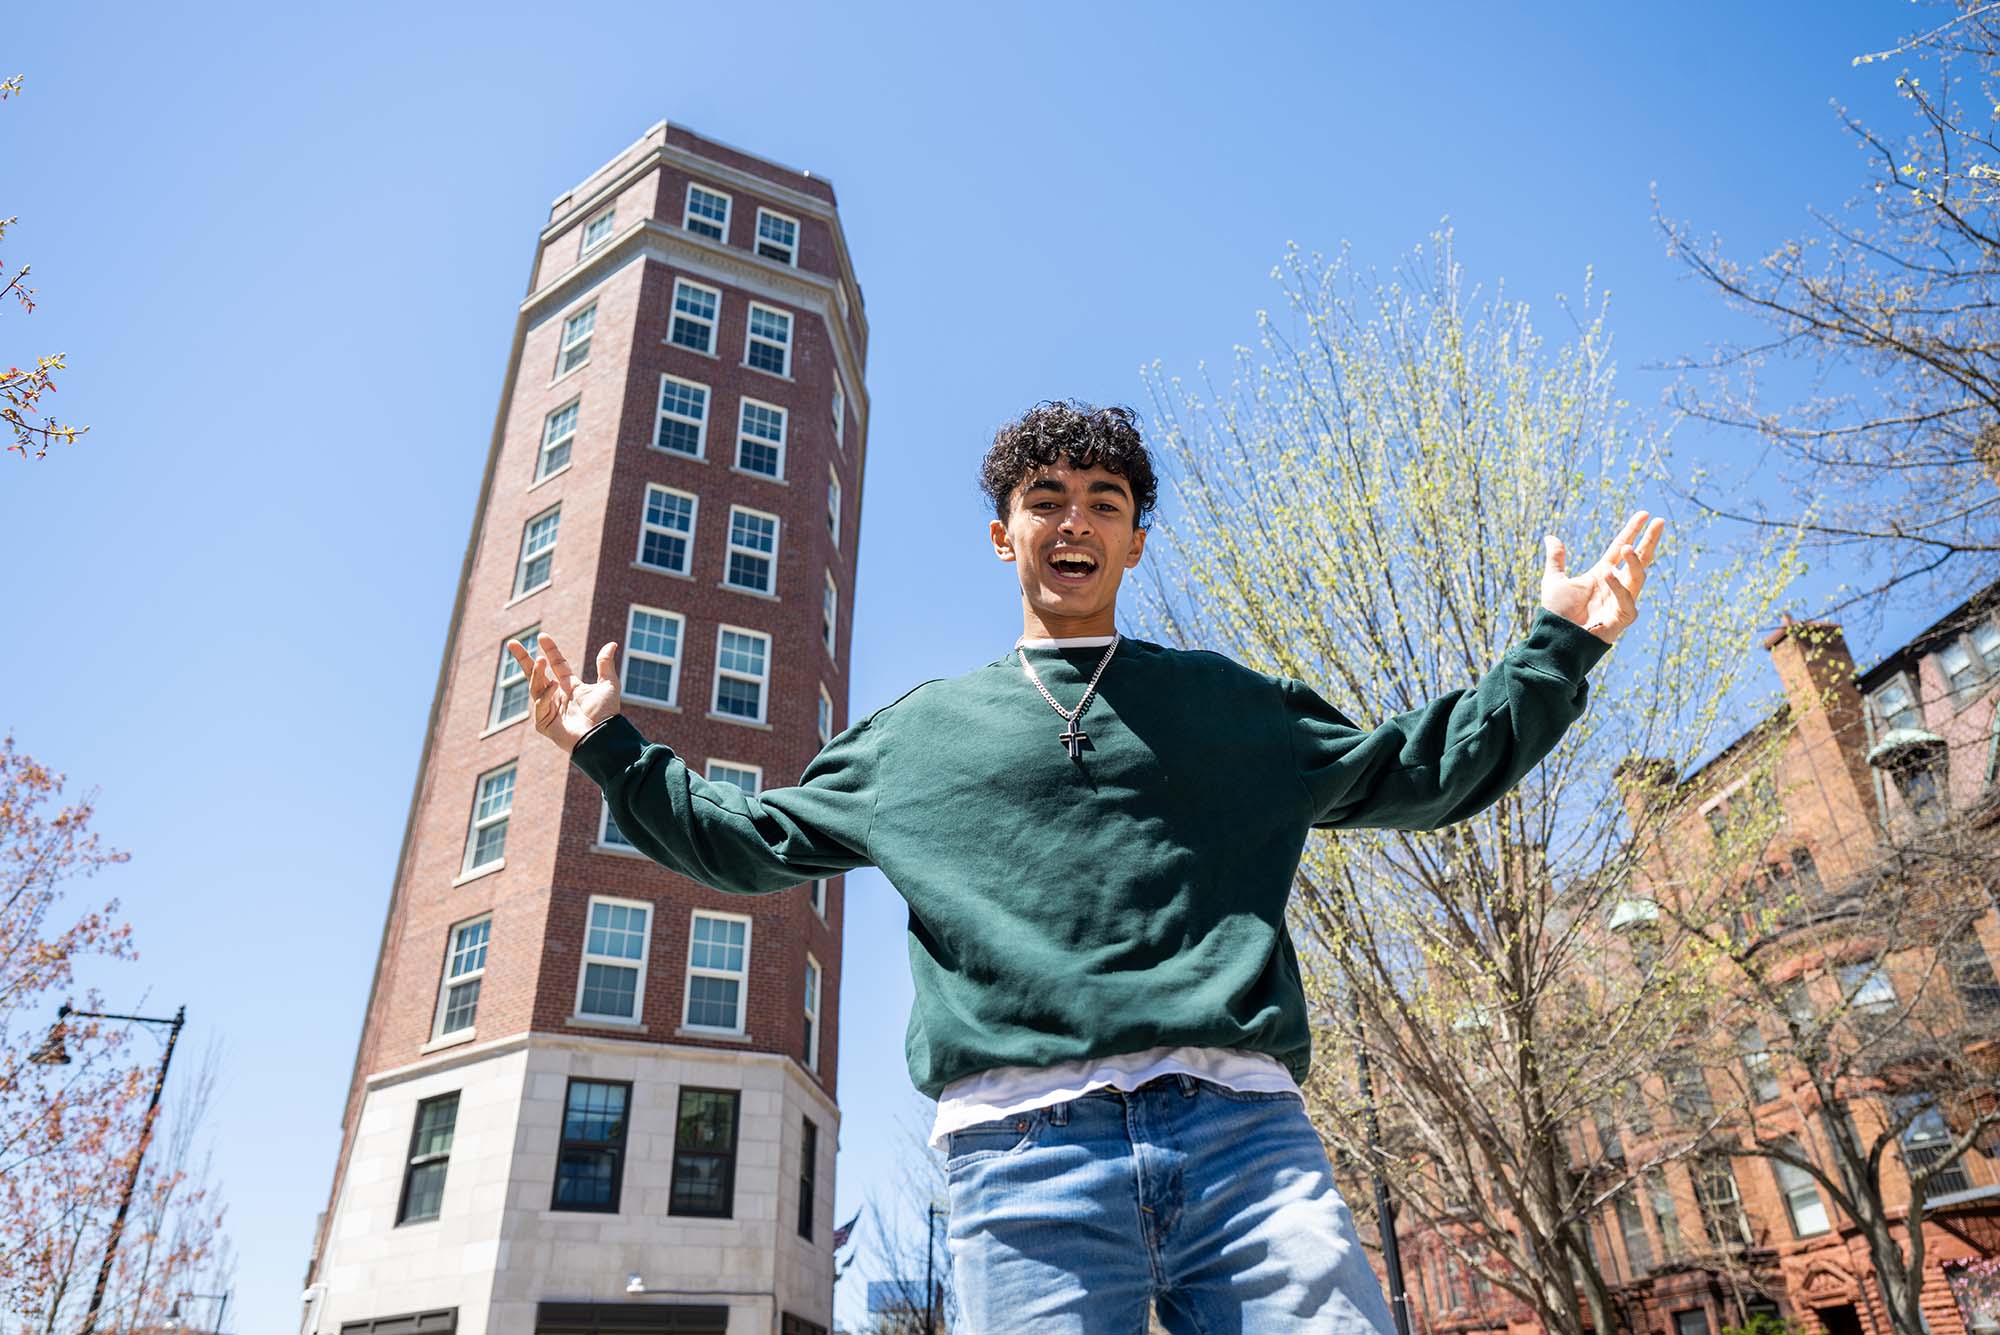 Photo: A picture of a male student posing in front of a dorm building in the city with his arms extended.